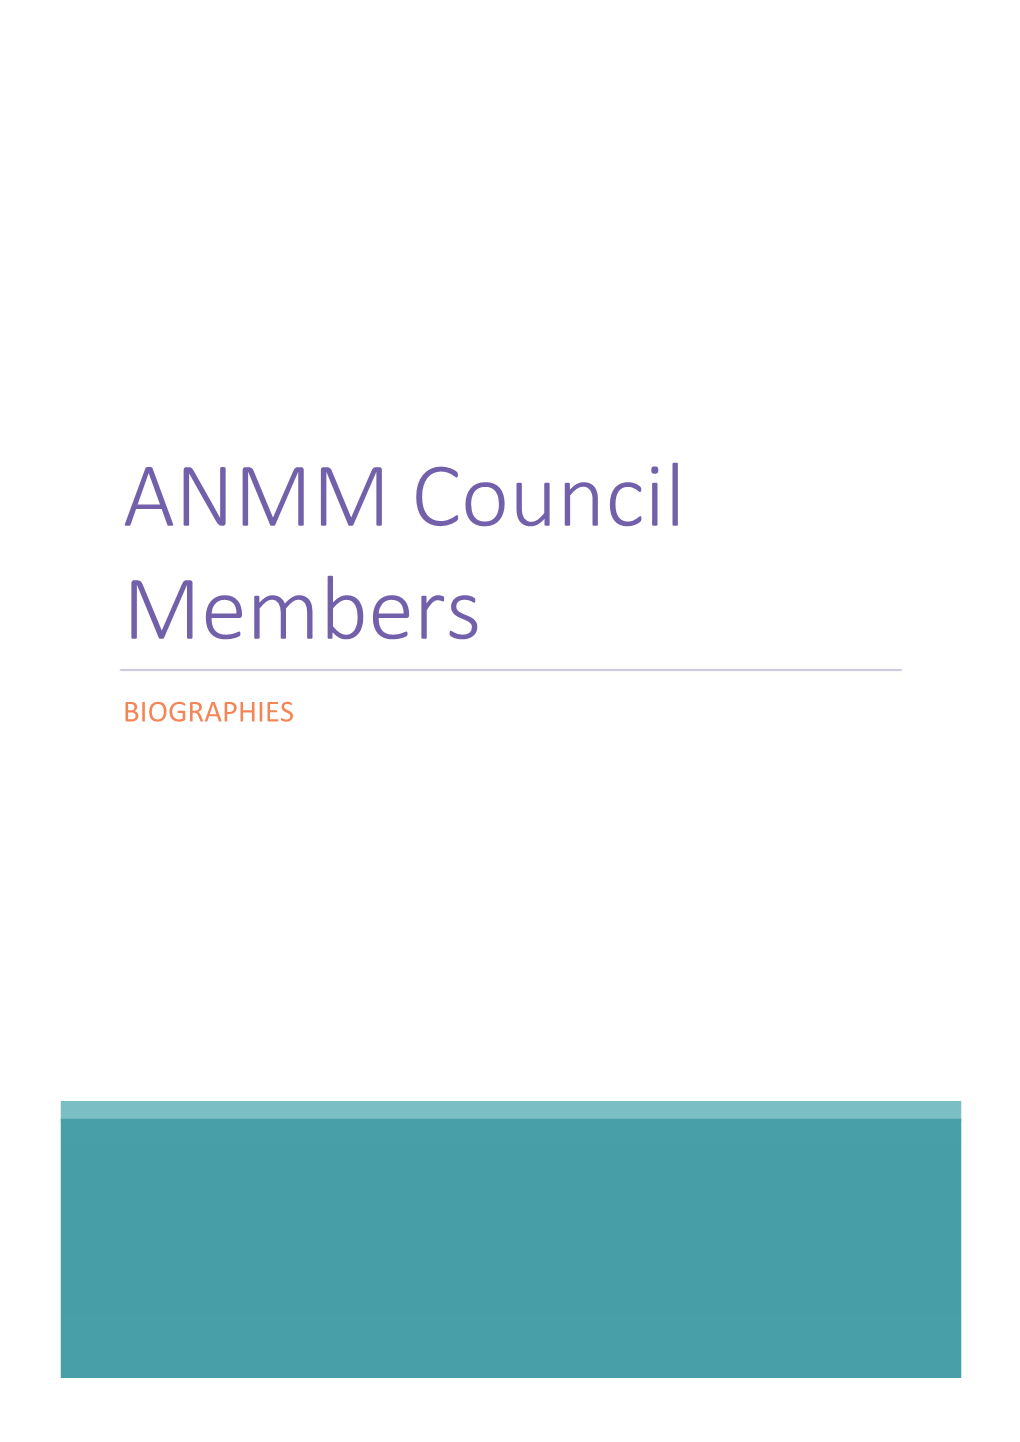 ANMM Council Members